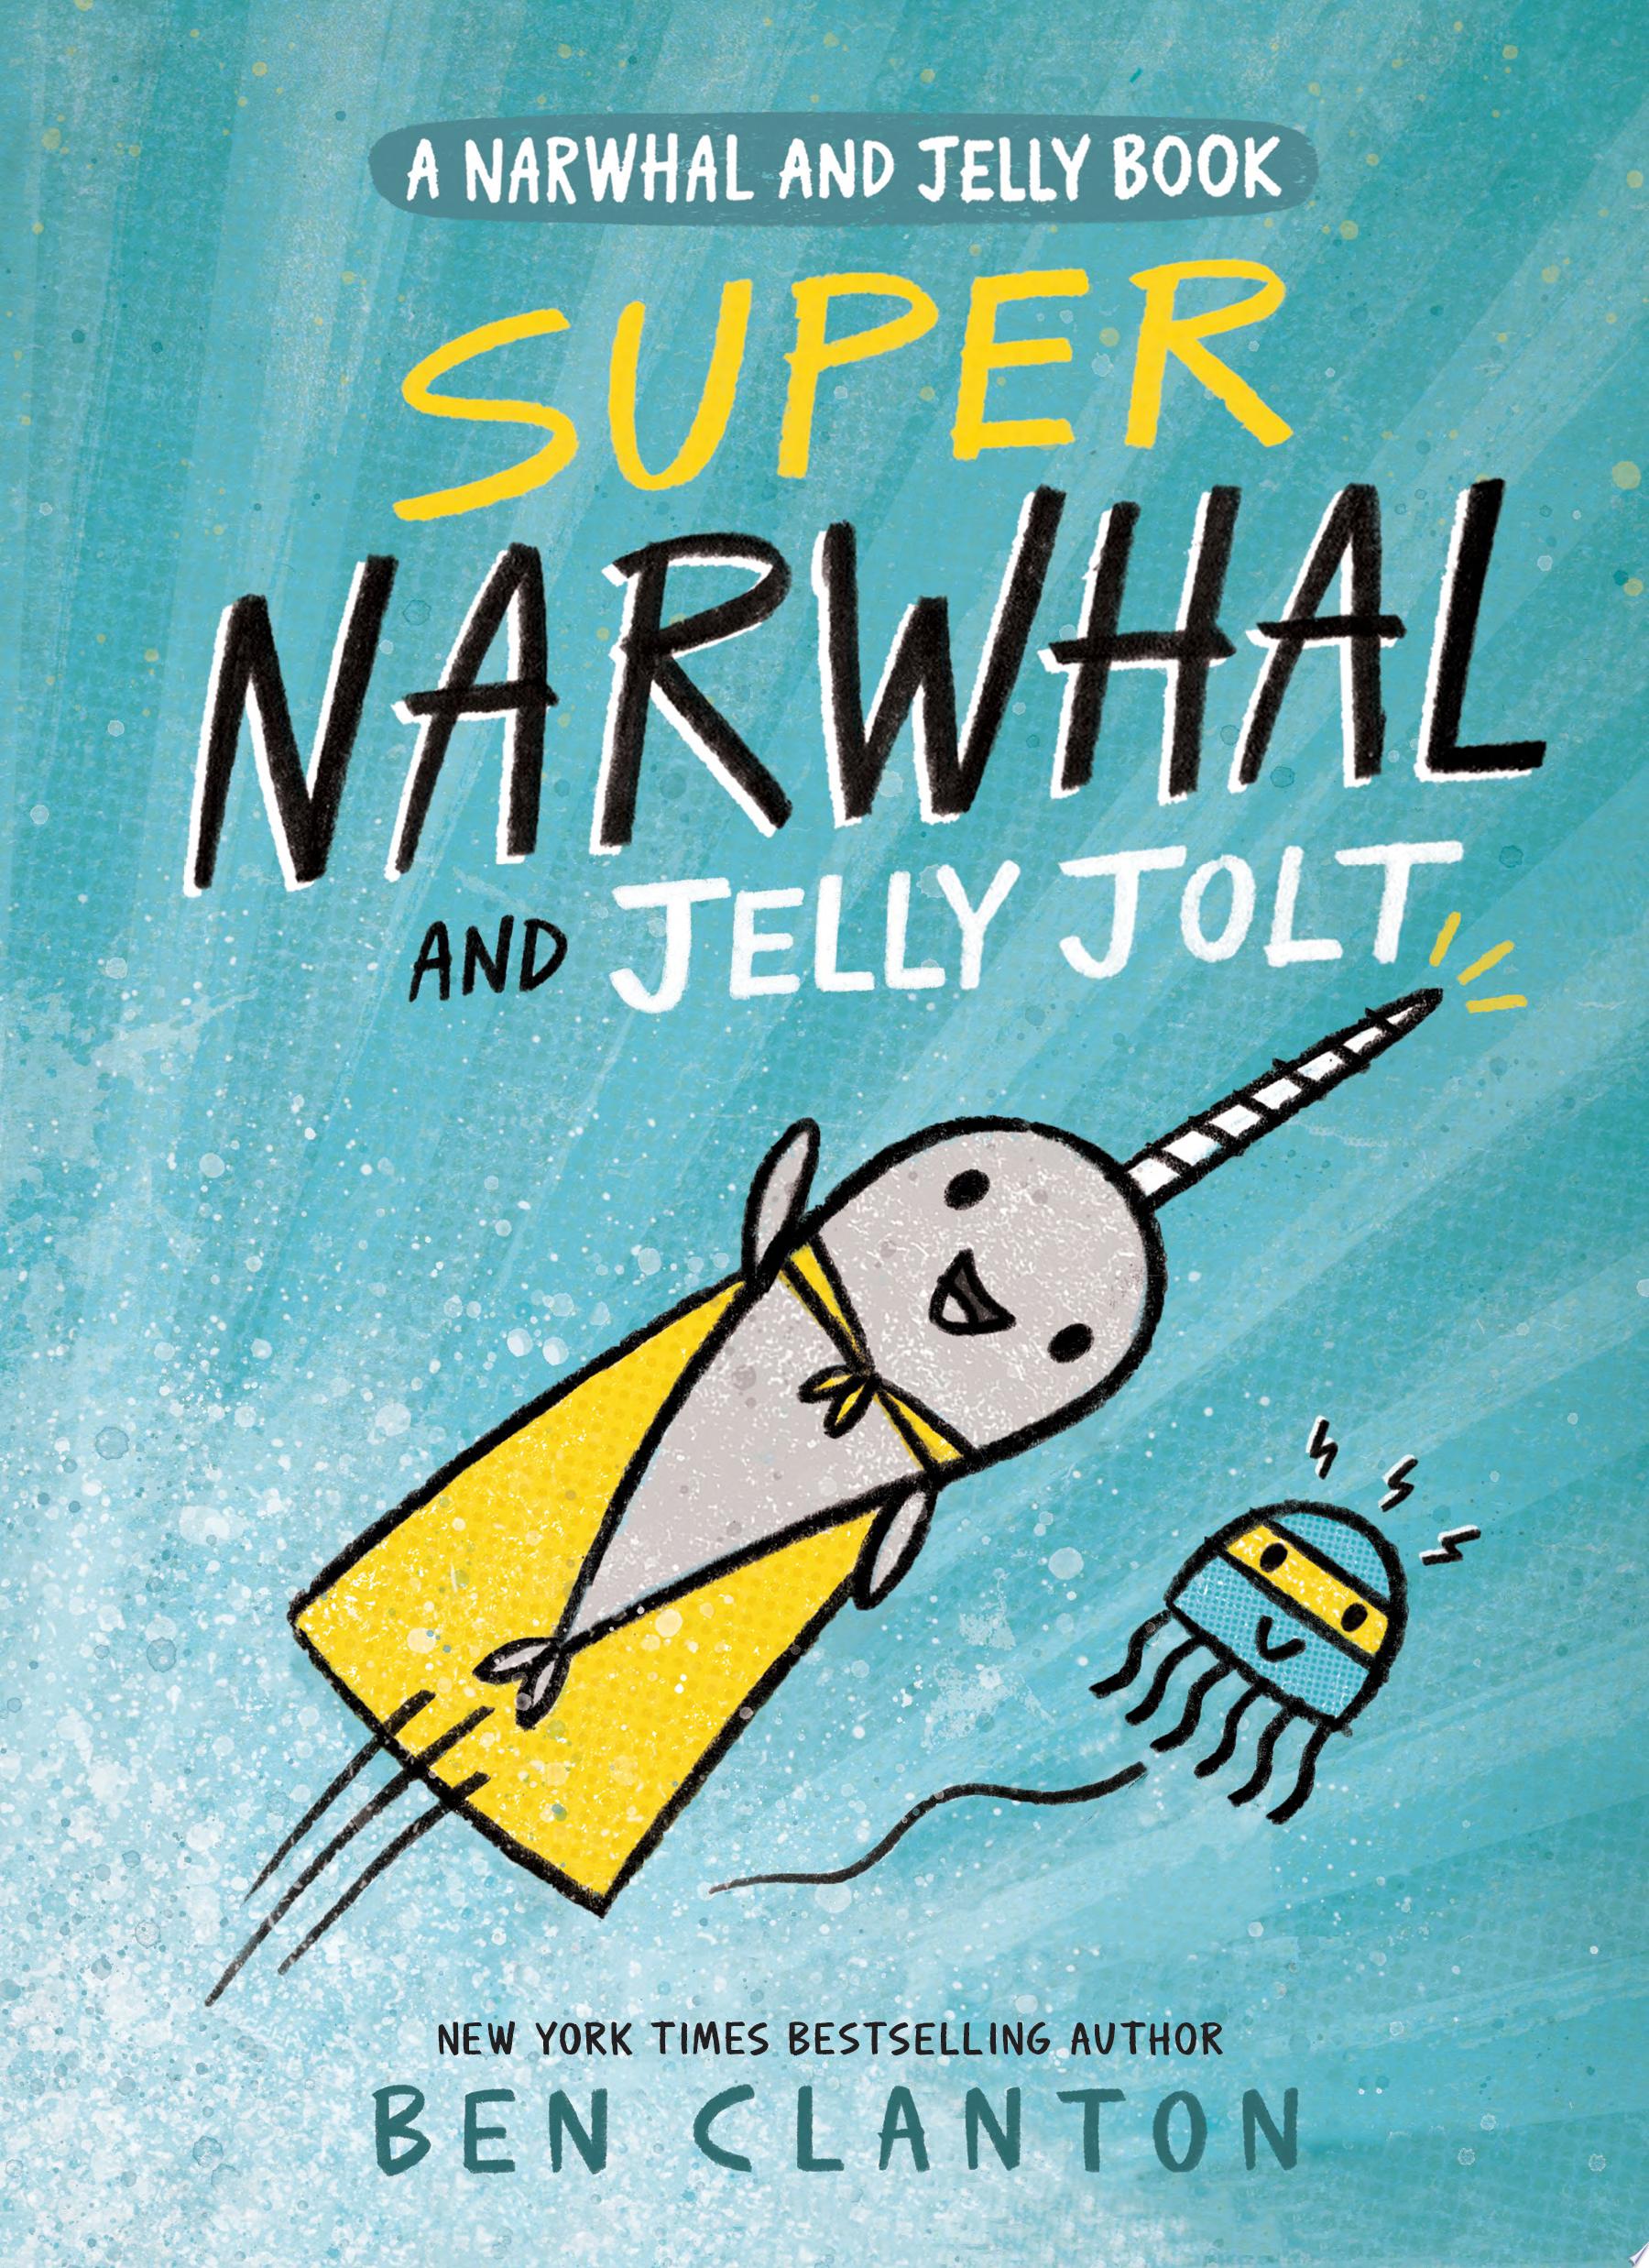 Image for "Super Narwhal and Jelly Jolt (A Narwhal and Jelly Book #2)"